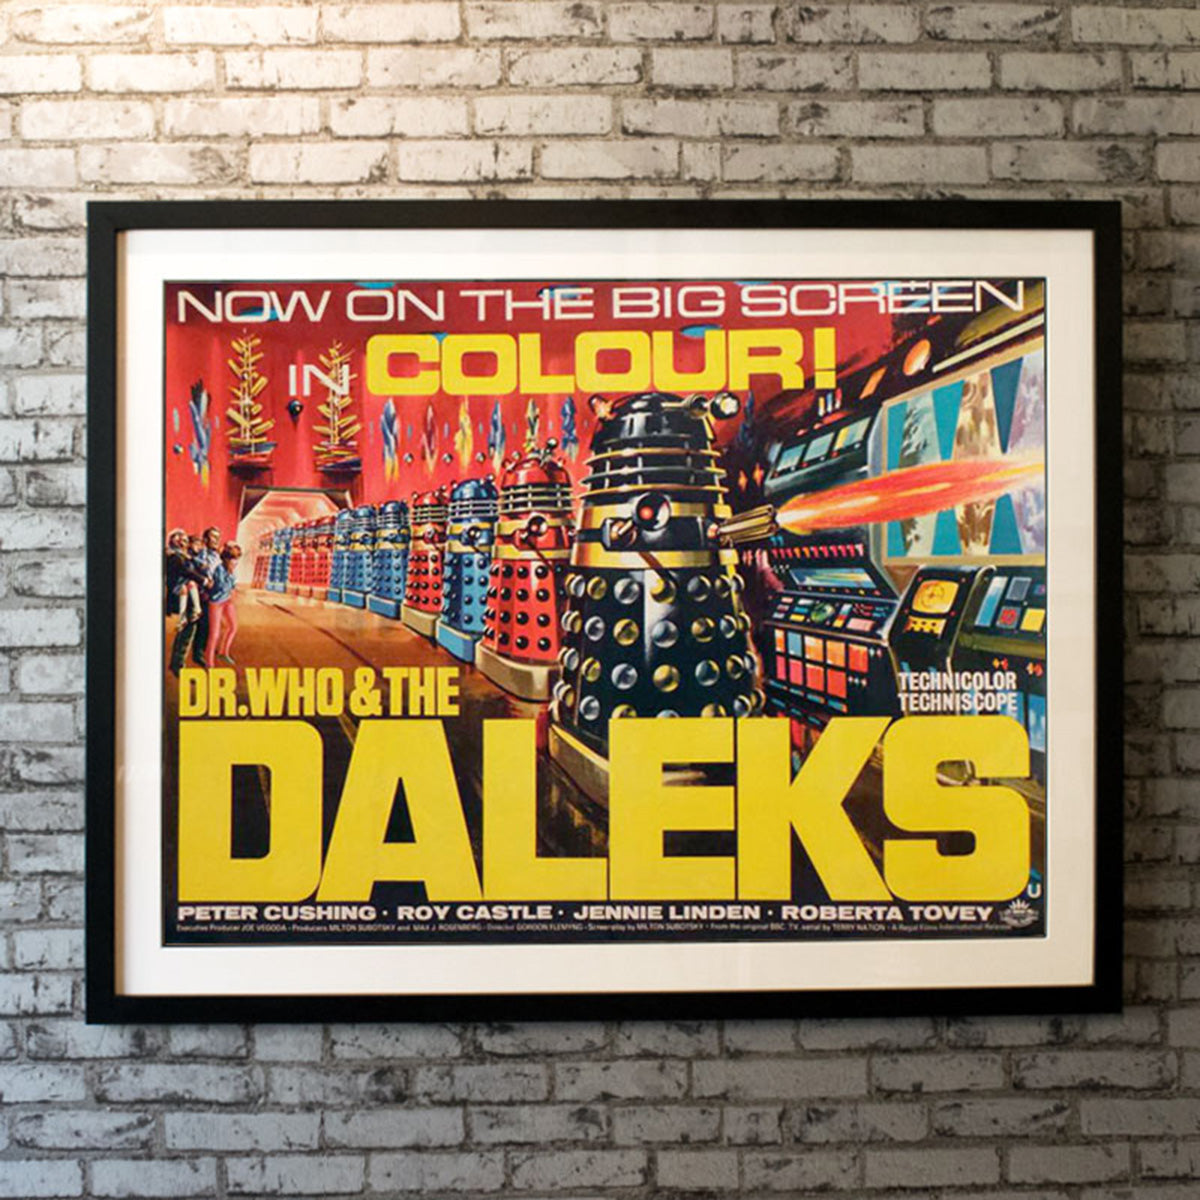 Original Movie Poster of Dr. Who And The Daleks (1965)